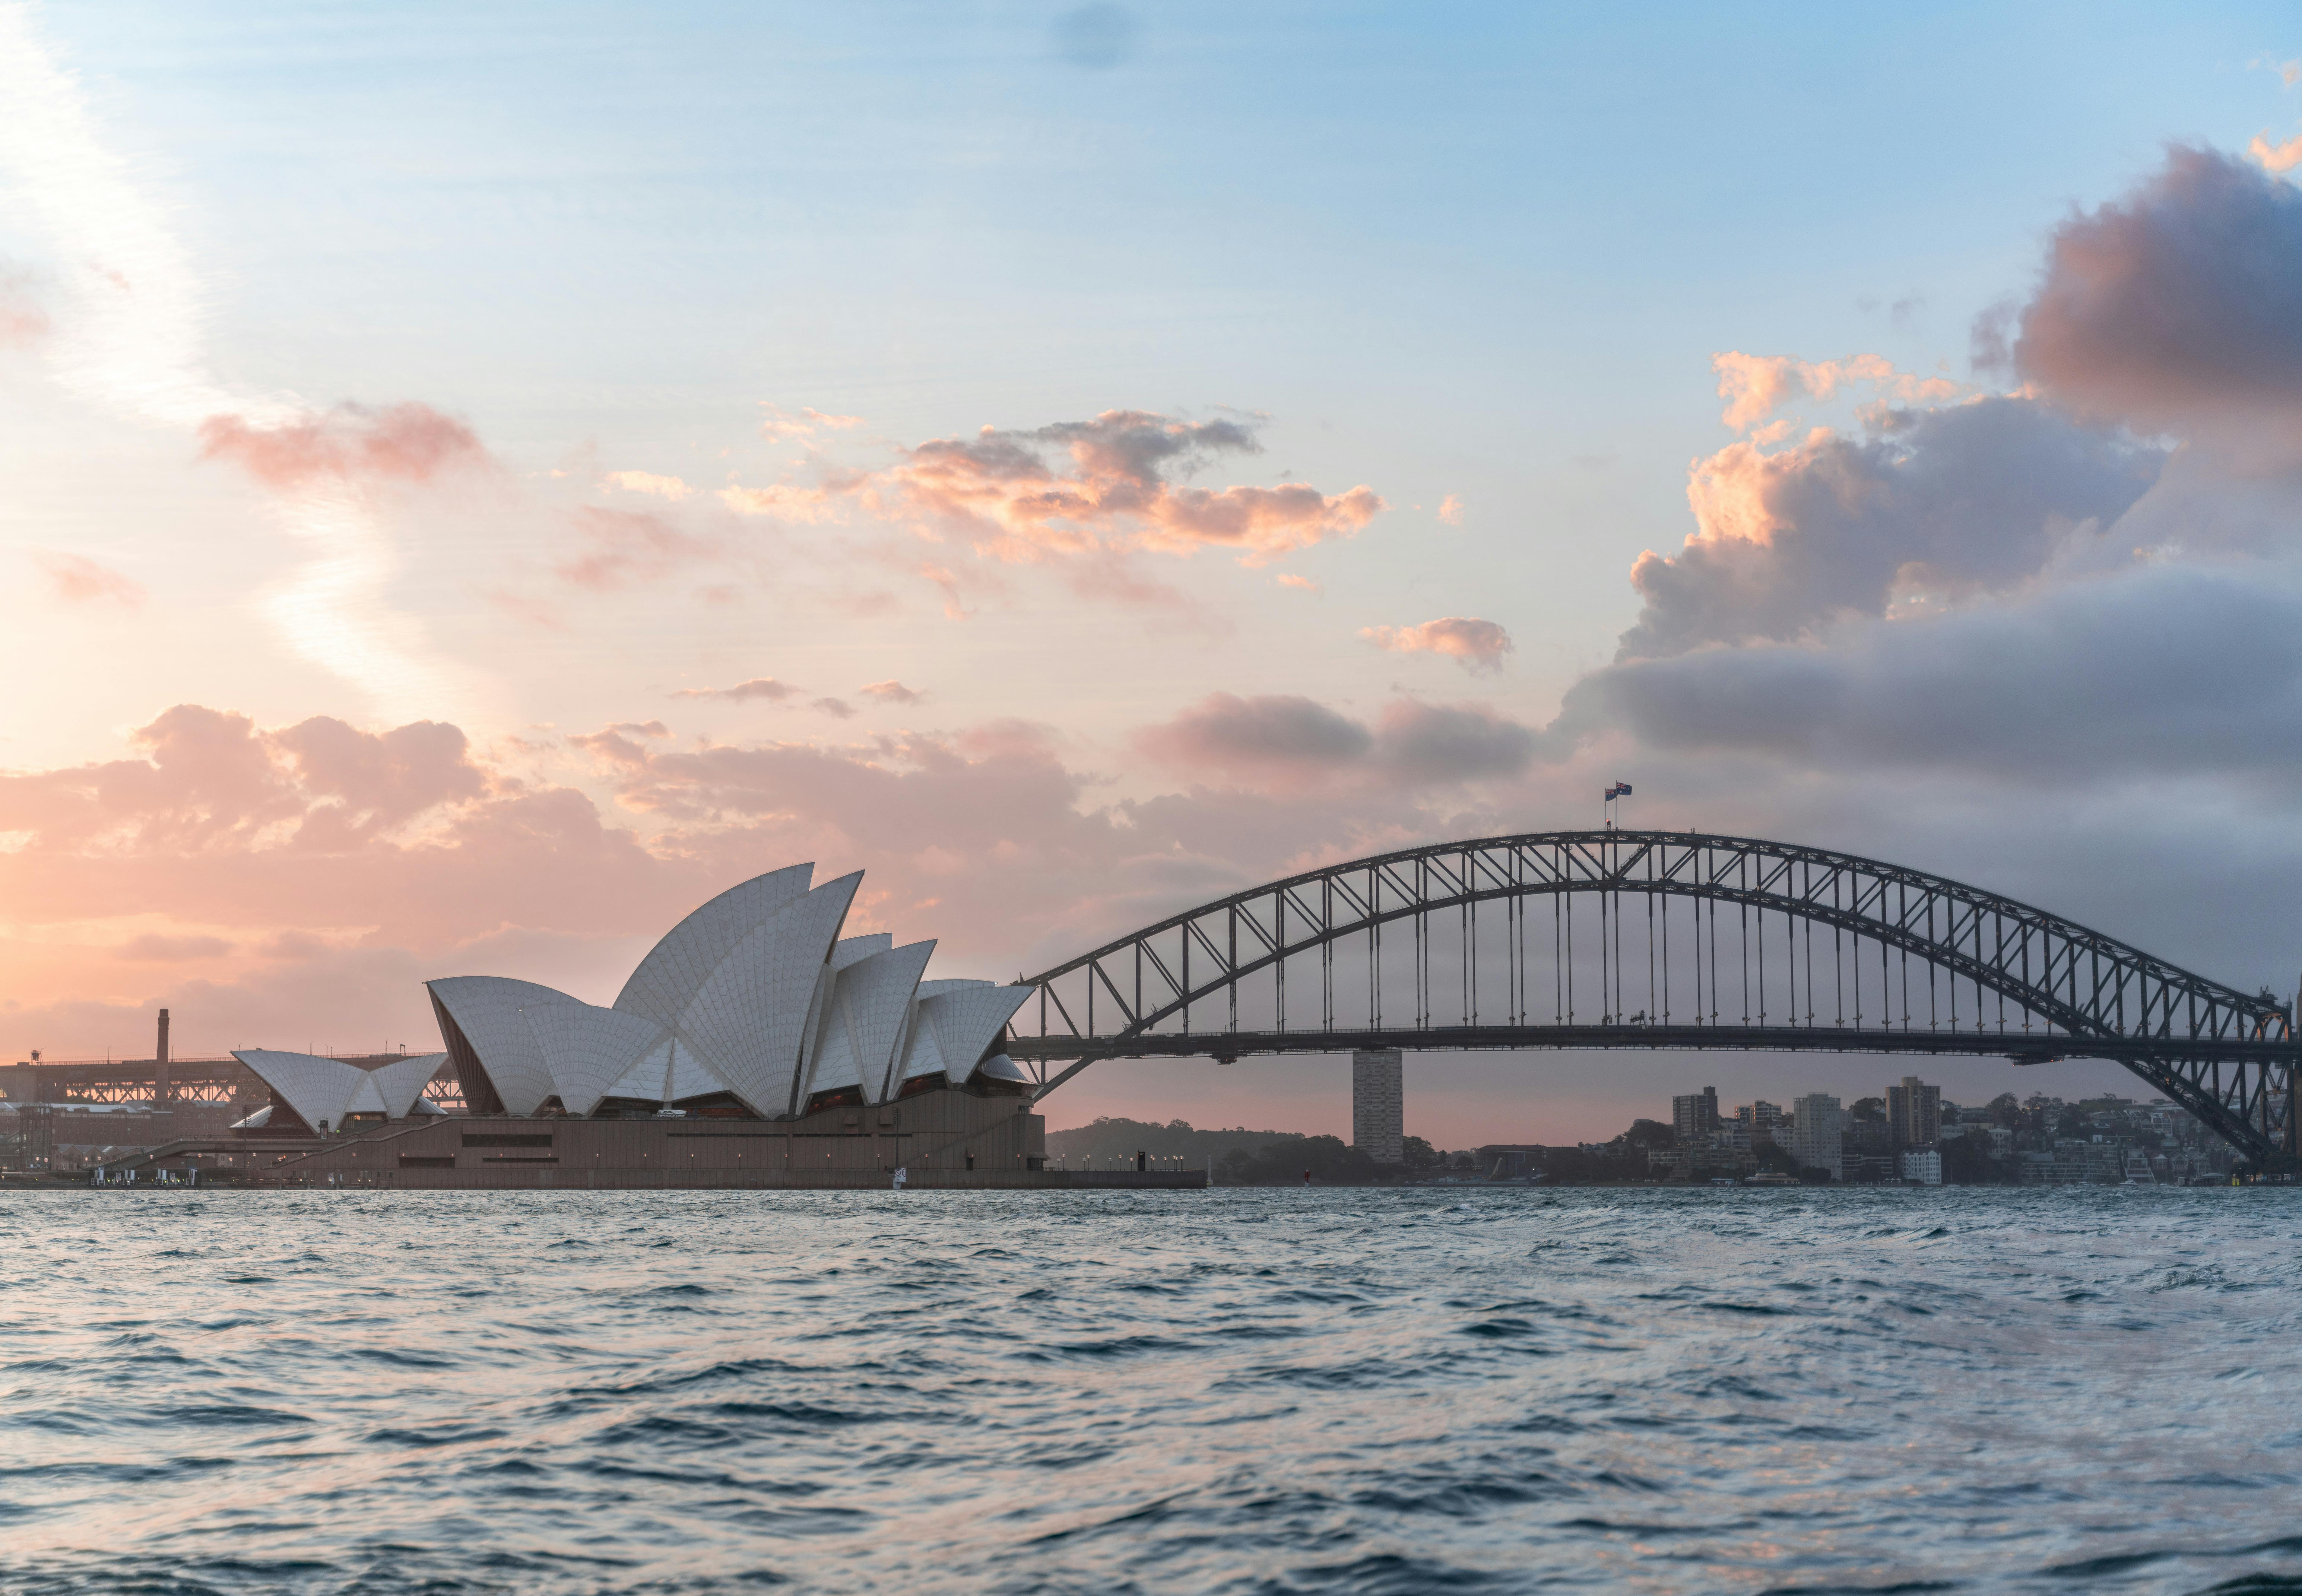 Early-stage decarbonisation for Australia and New Zealand